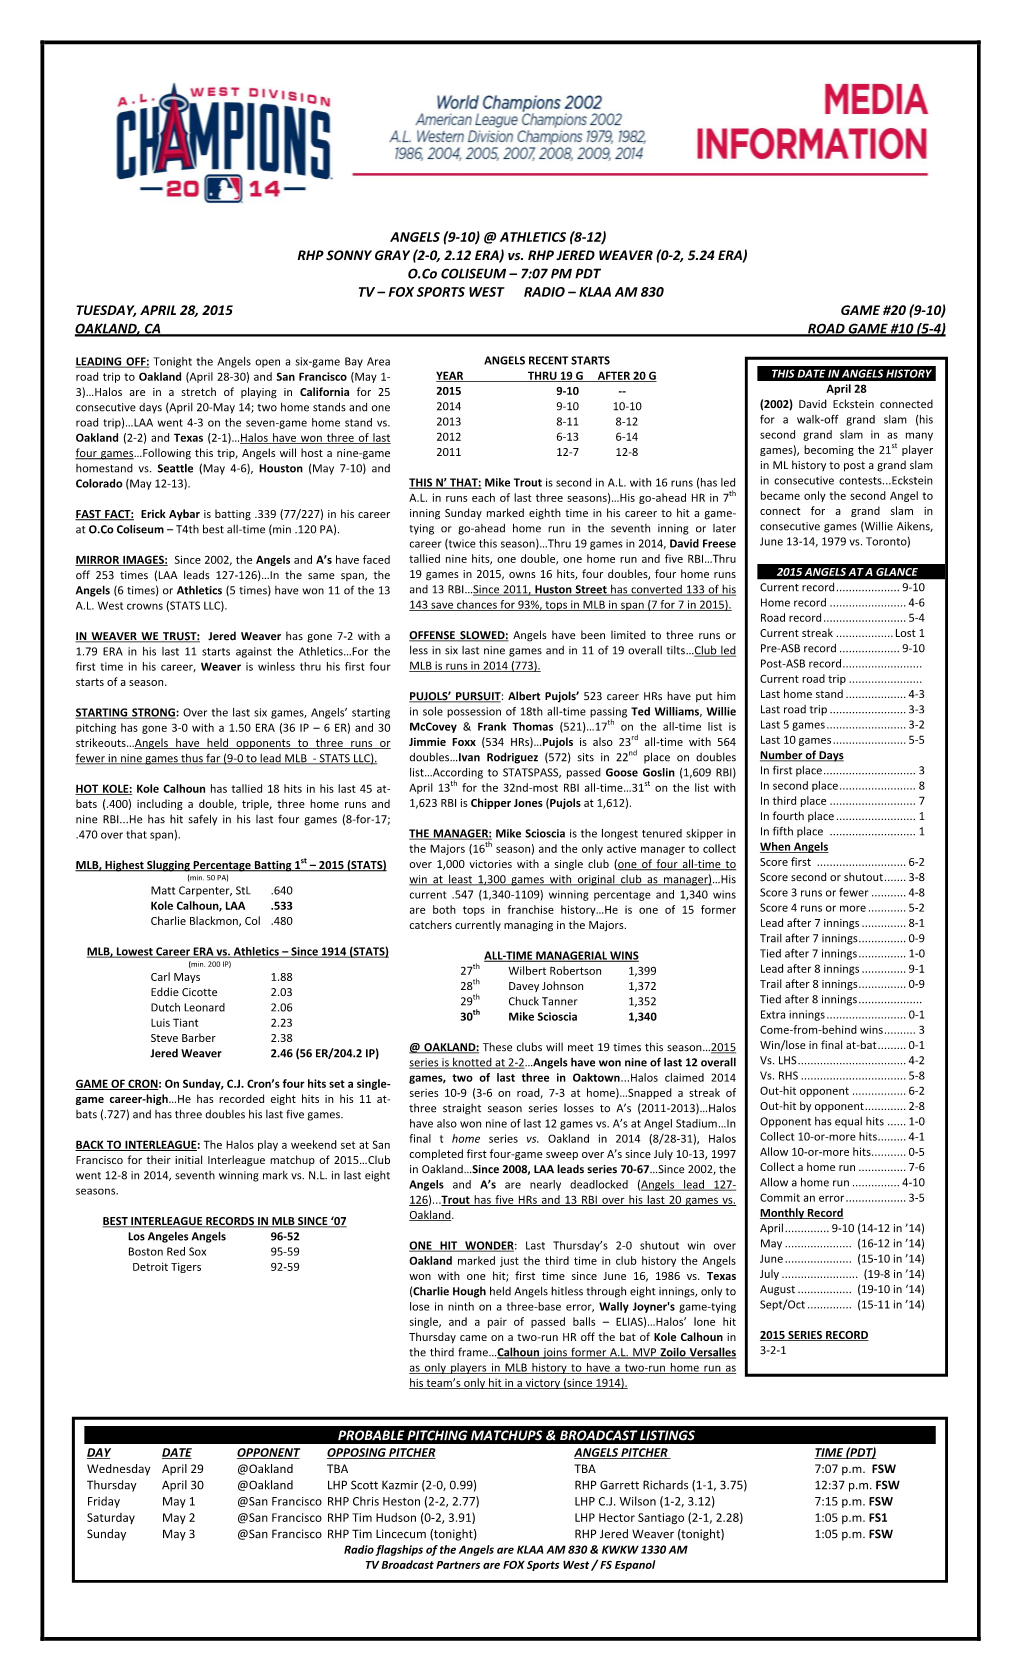 04-28-2015 Angels Game Notes